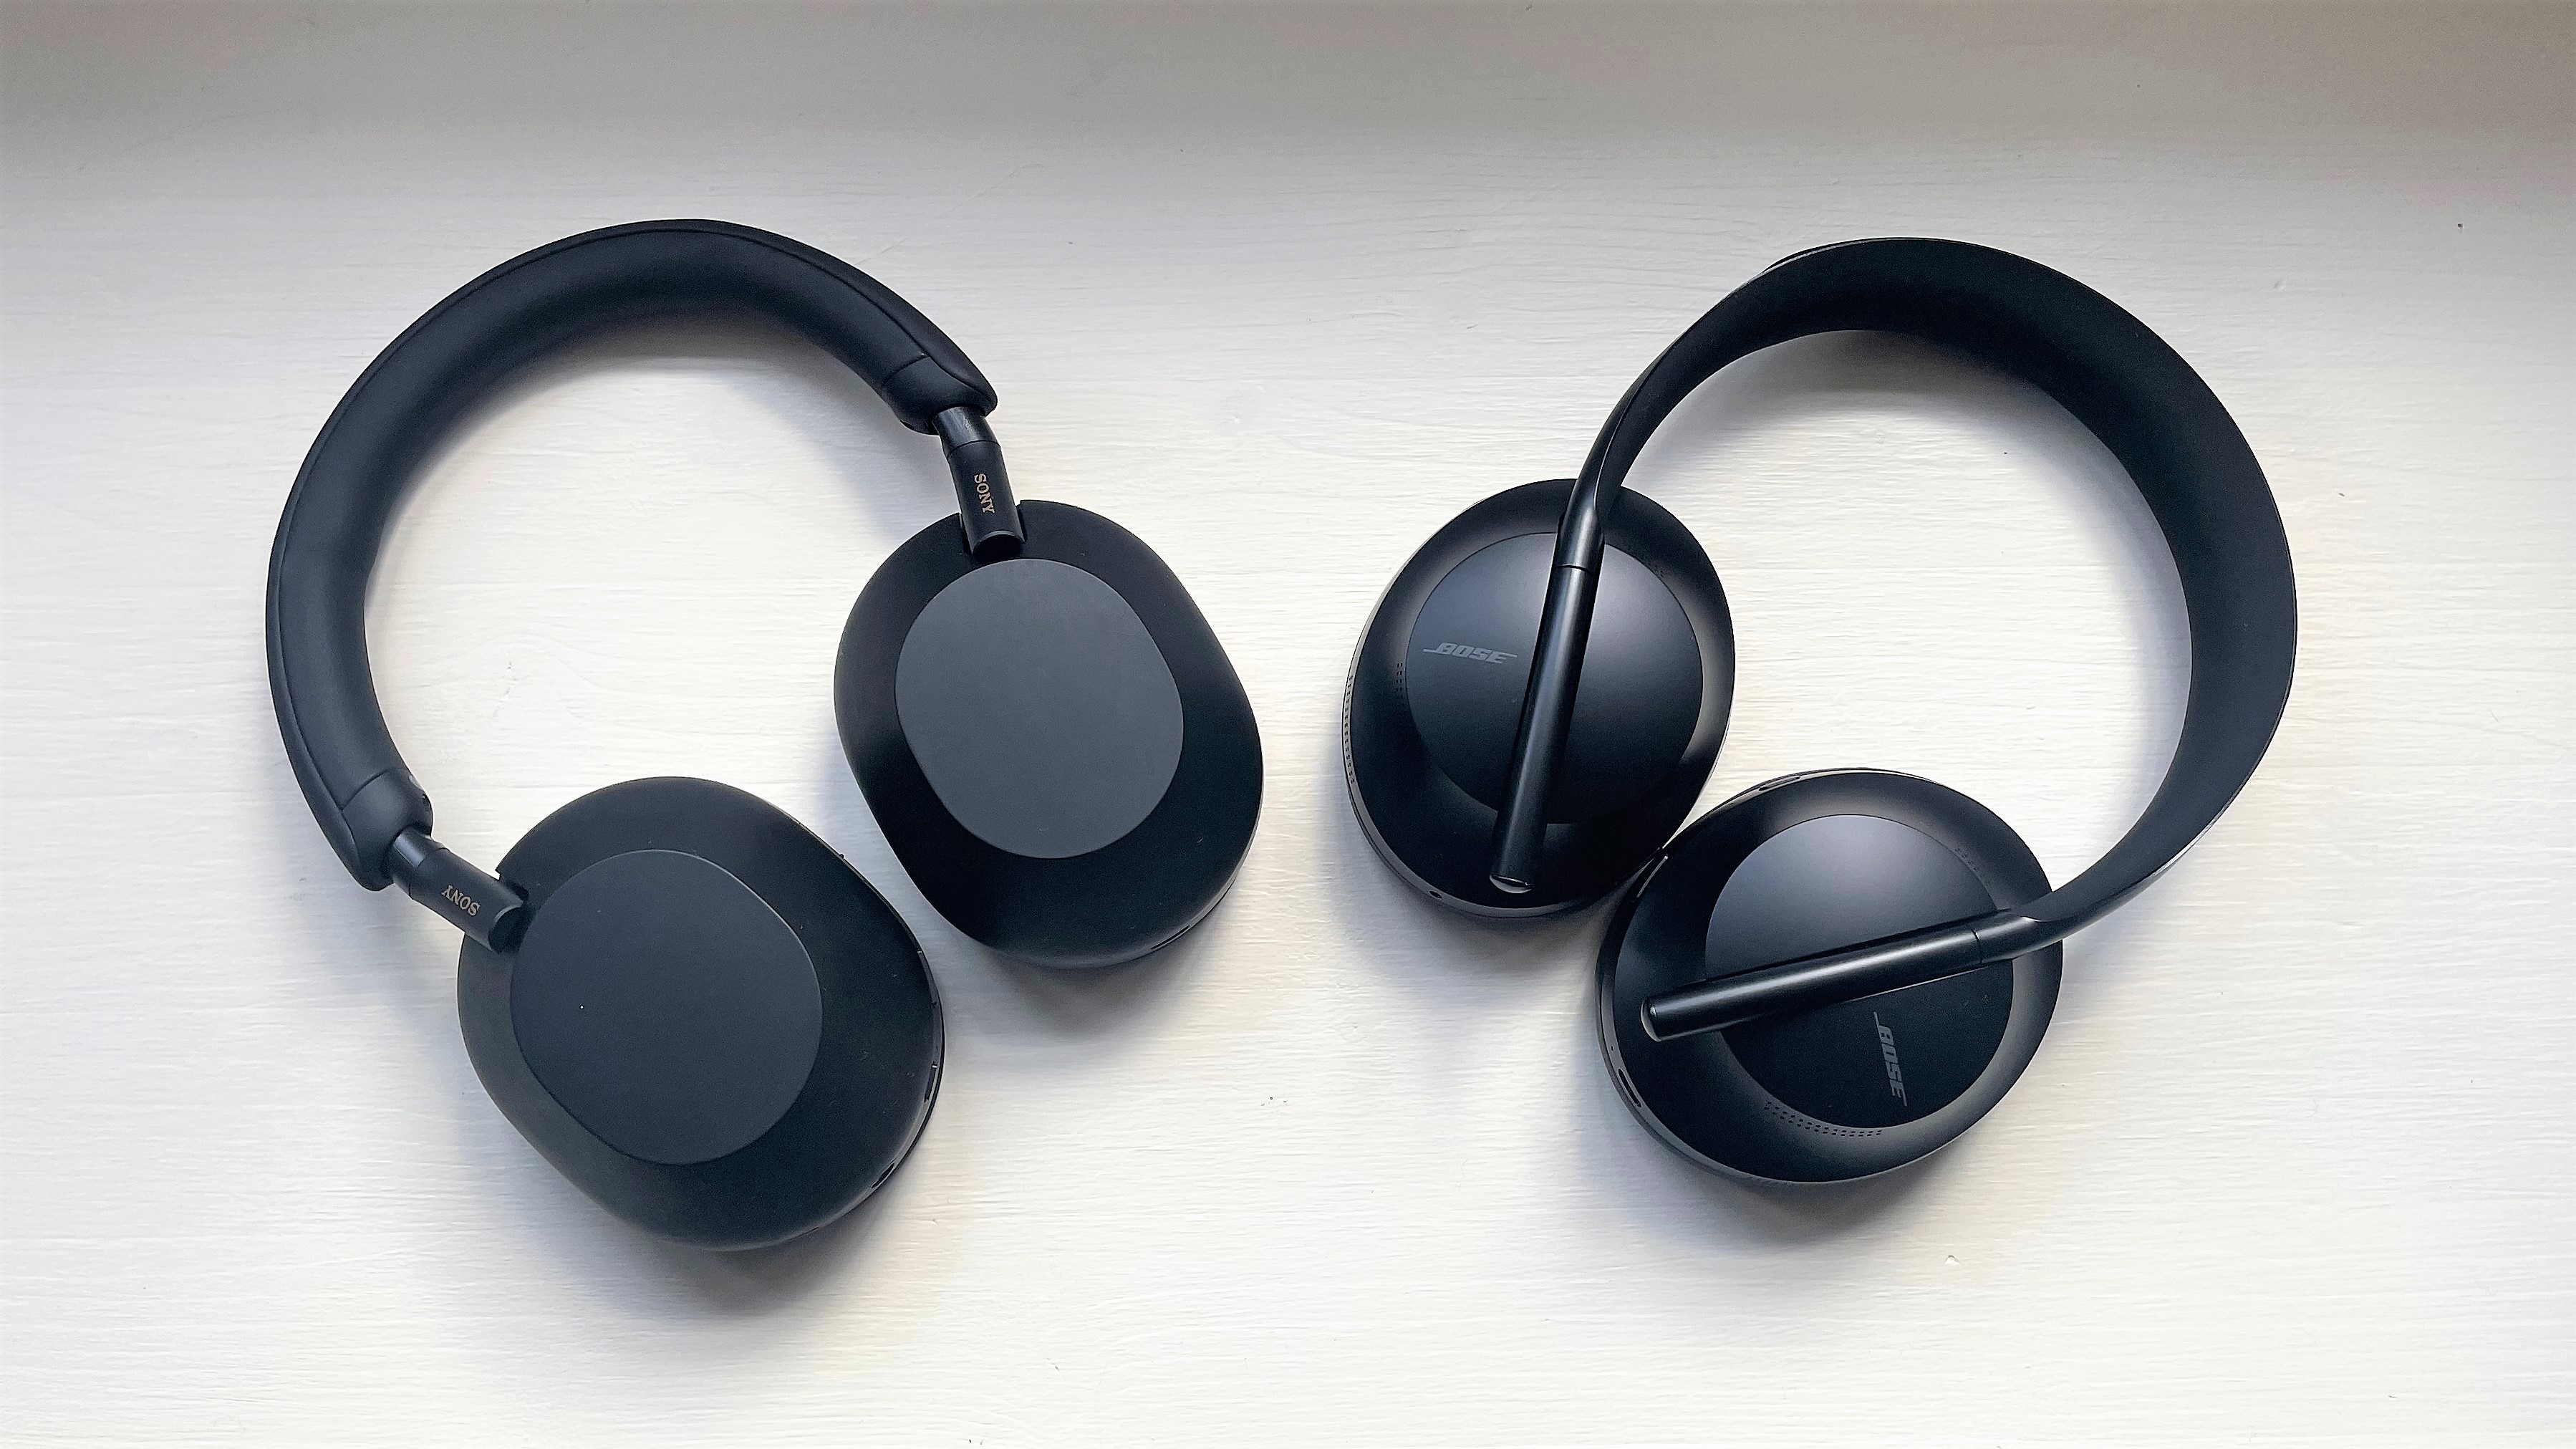 Sony WH-1000XM5 vs. Bose 700: Which is the No. 1 noise-cancelling  headphone?